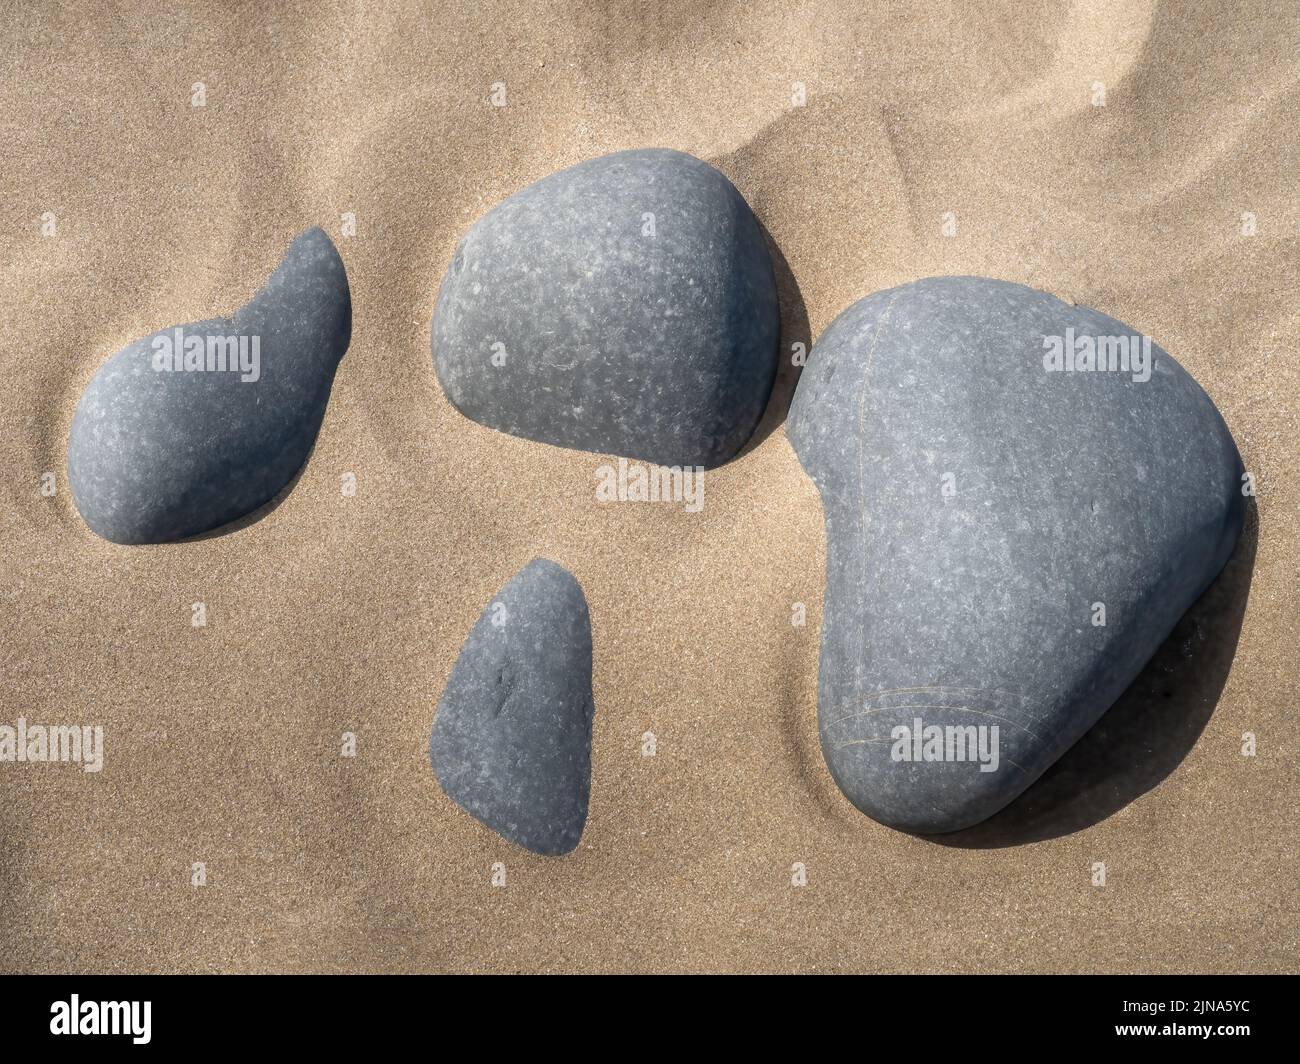 Grey pebbles on golden sandy beach, abstract effect image. Stock Photo